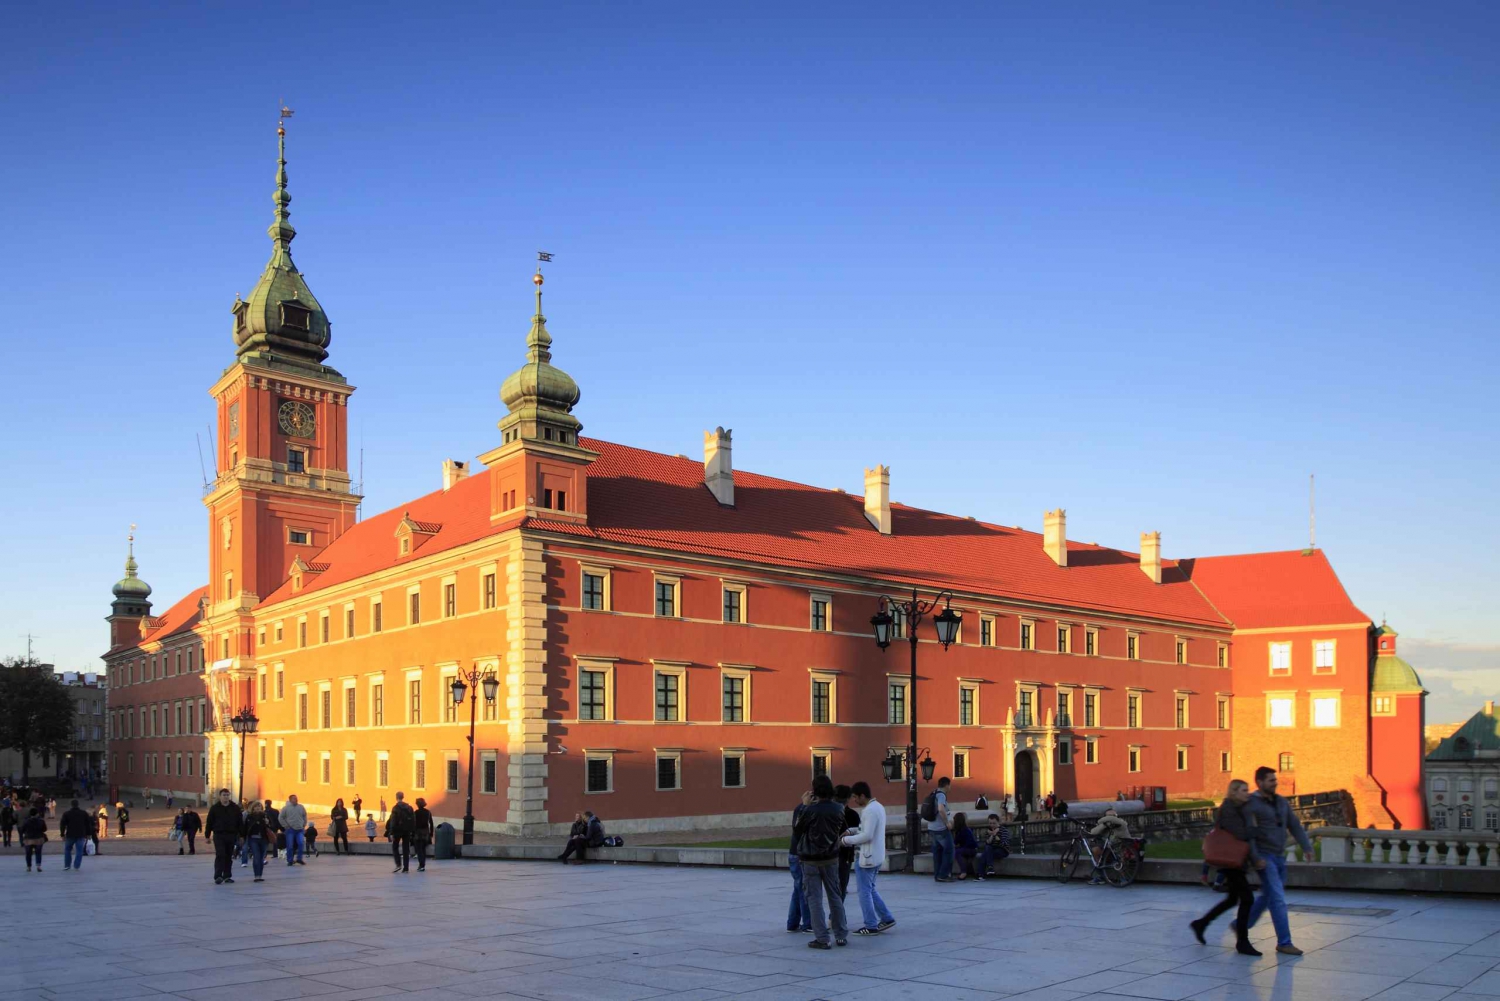 Skip-the-Line Warsaw Royal Castle Private Guided Tour